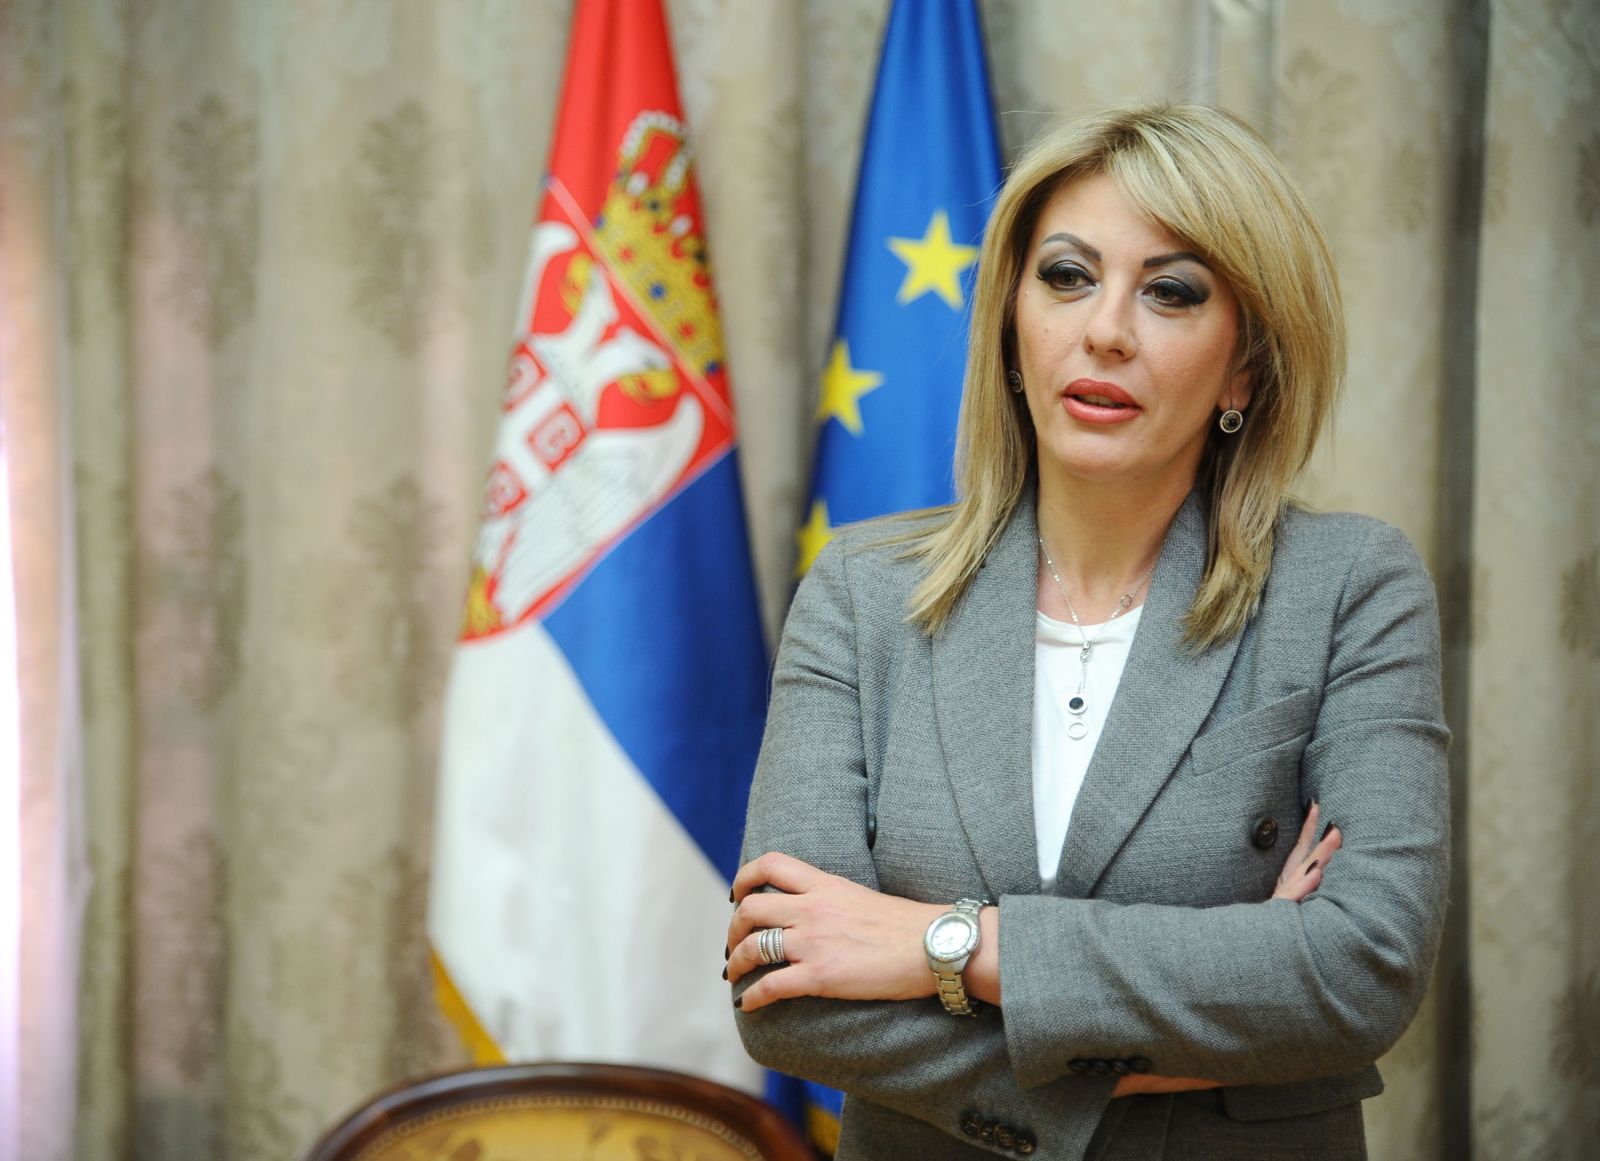 J. Joksimović: We are active in reforms and committed to cooperation; we expect the opening of new chapters